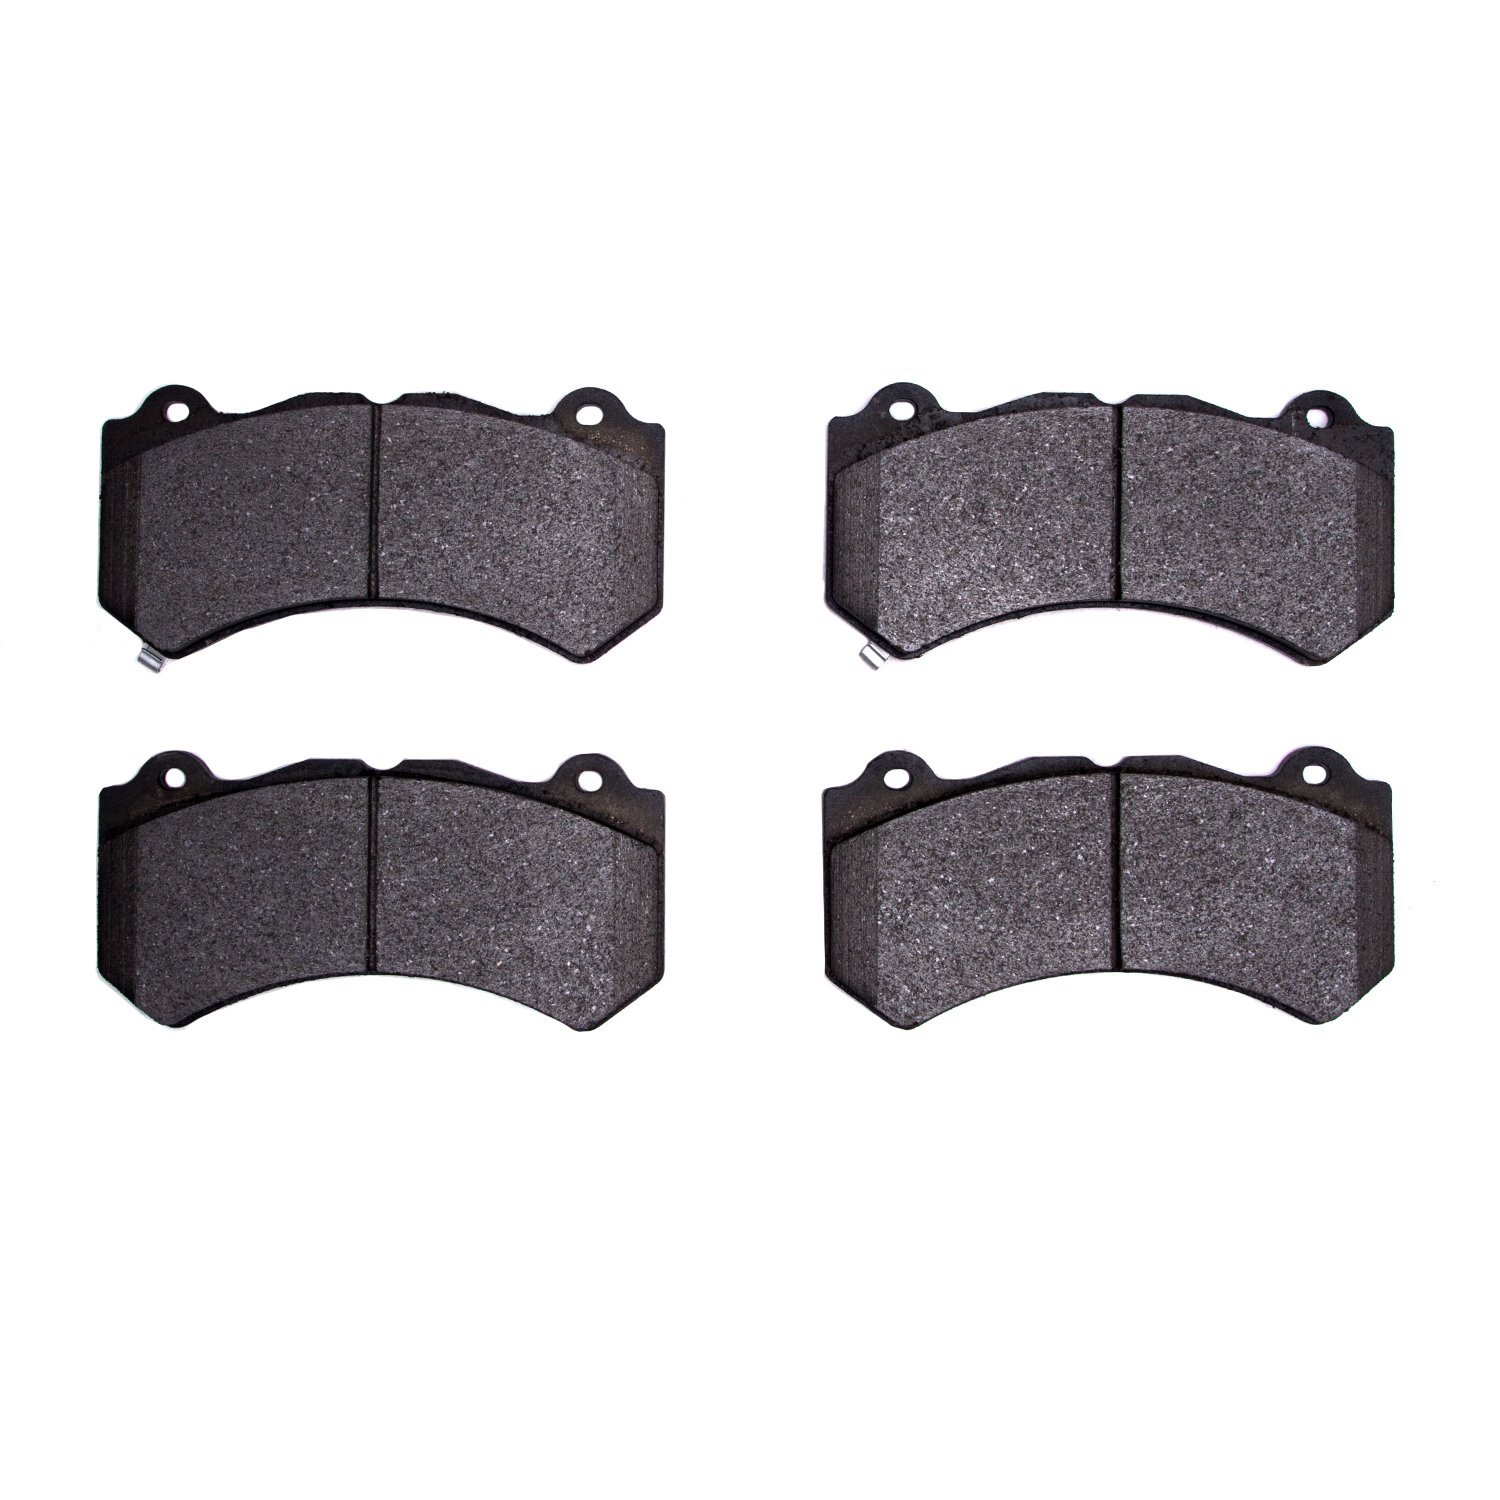 Euro Ceramic Brake Pads, Fits Select Fits Multiple Makes/Models, Position: Front